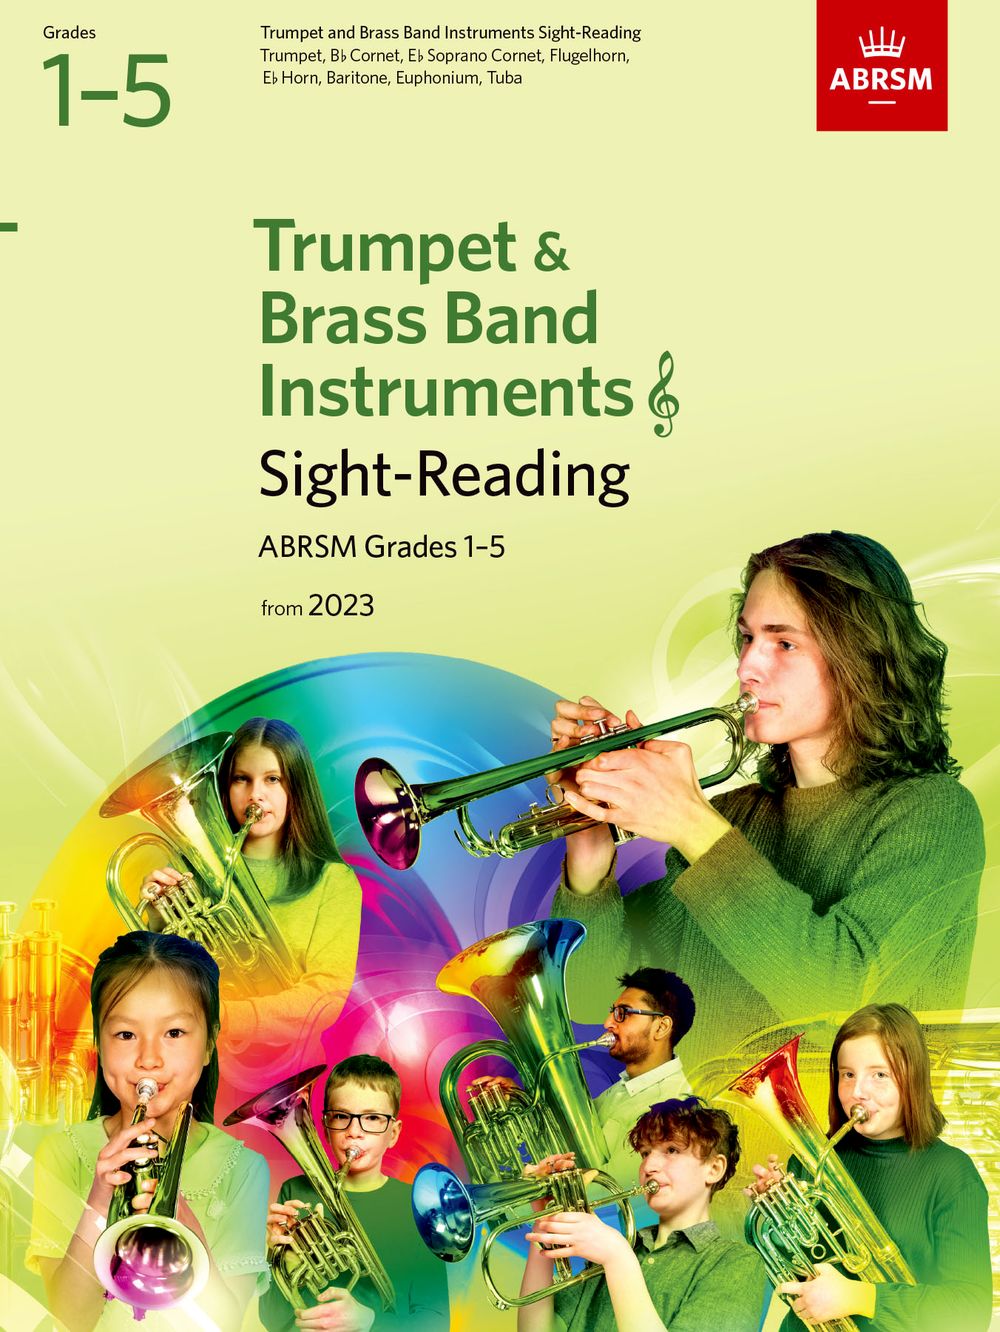 Sight-reading Trumpet & Brass Insts 2023 1-5 Abrsm Sheet Music Songbook